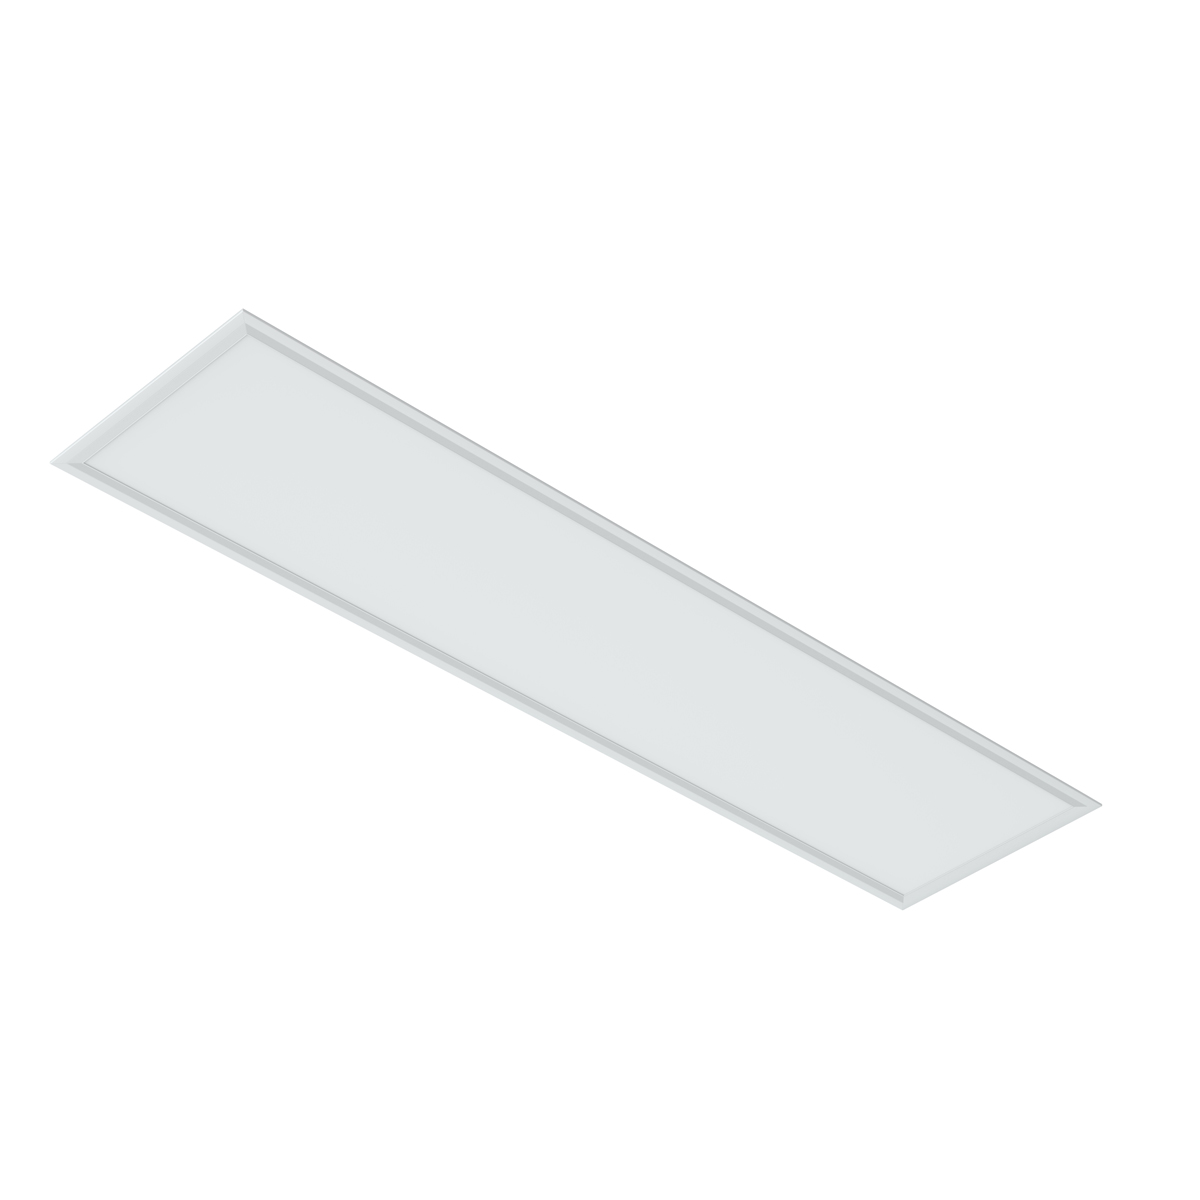 View 1200 x 300mm LED Panel Light Colour Adjustable TPa Diffuser information